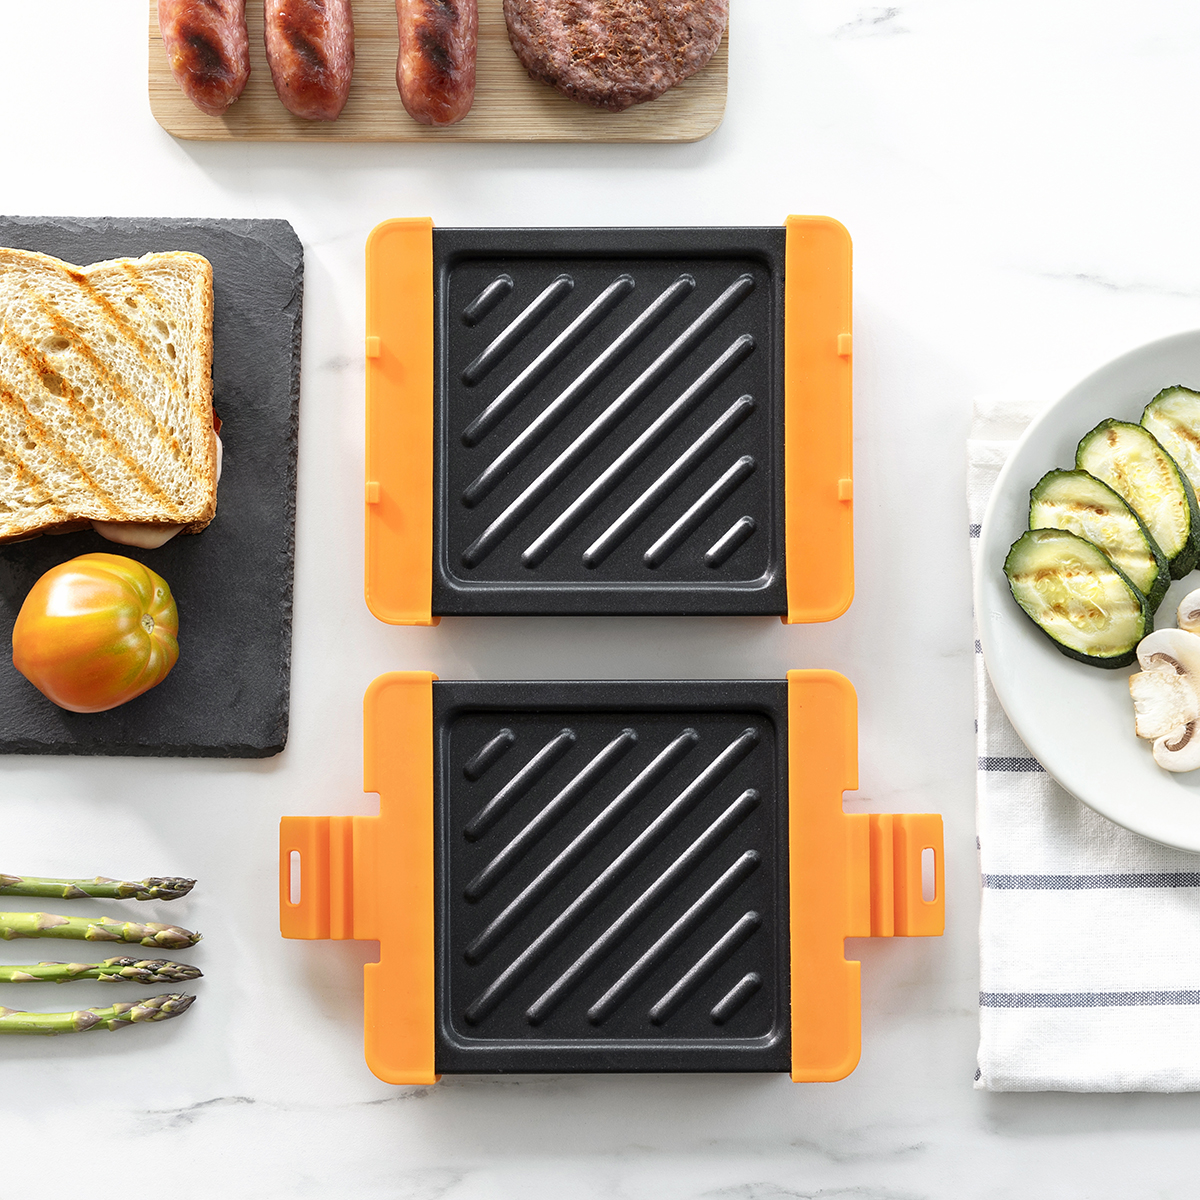 INNOVAGOODS Mikrowellengrill Grillet